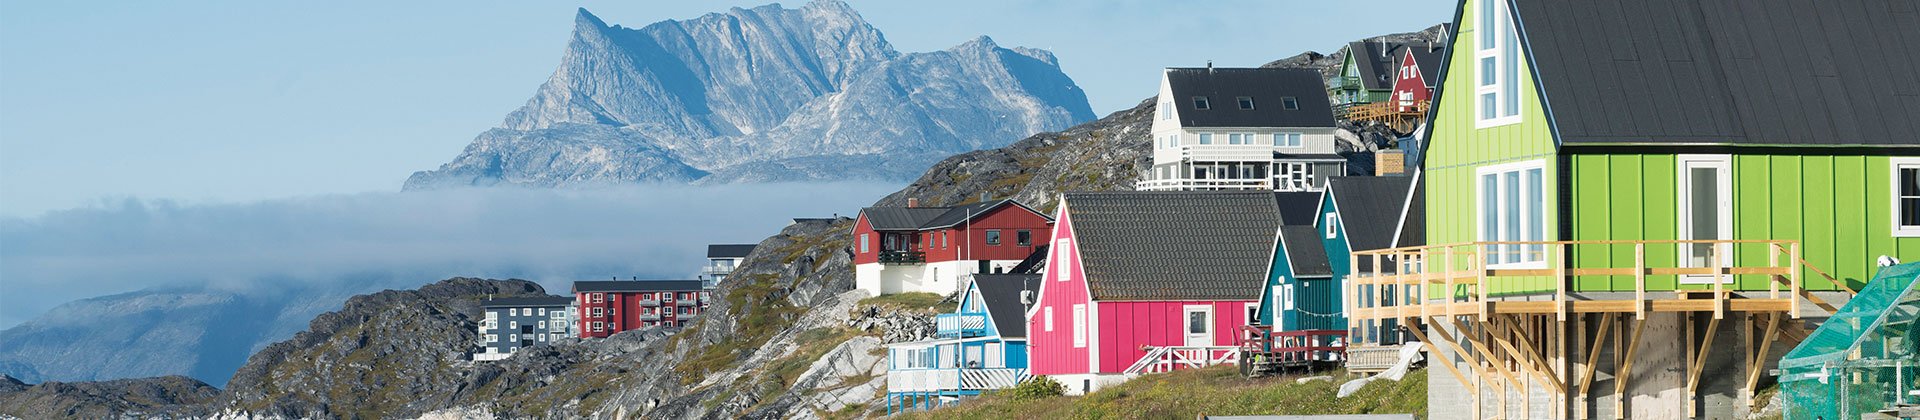 Greenland houses